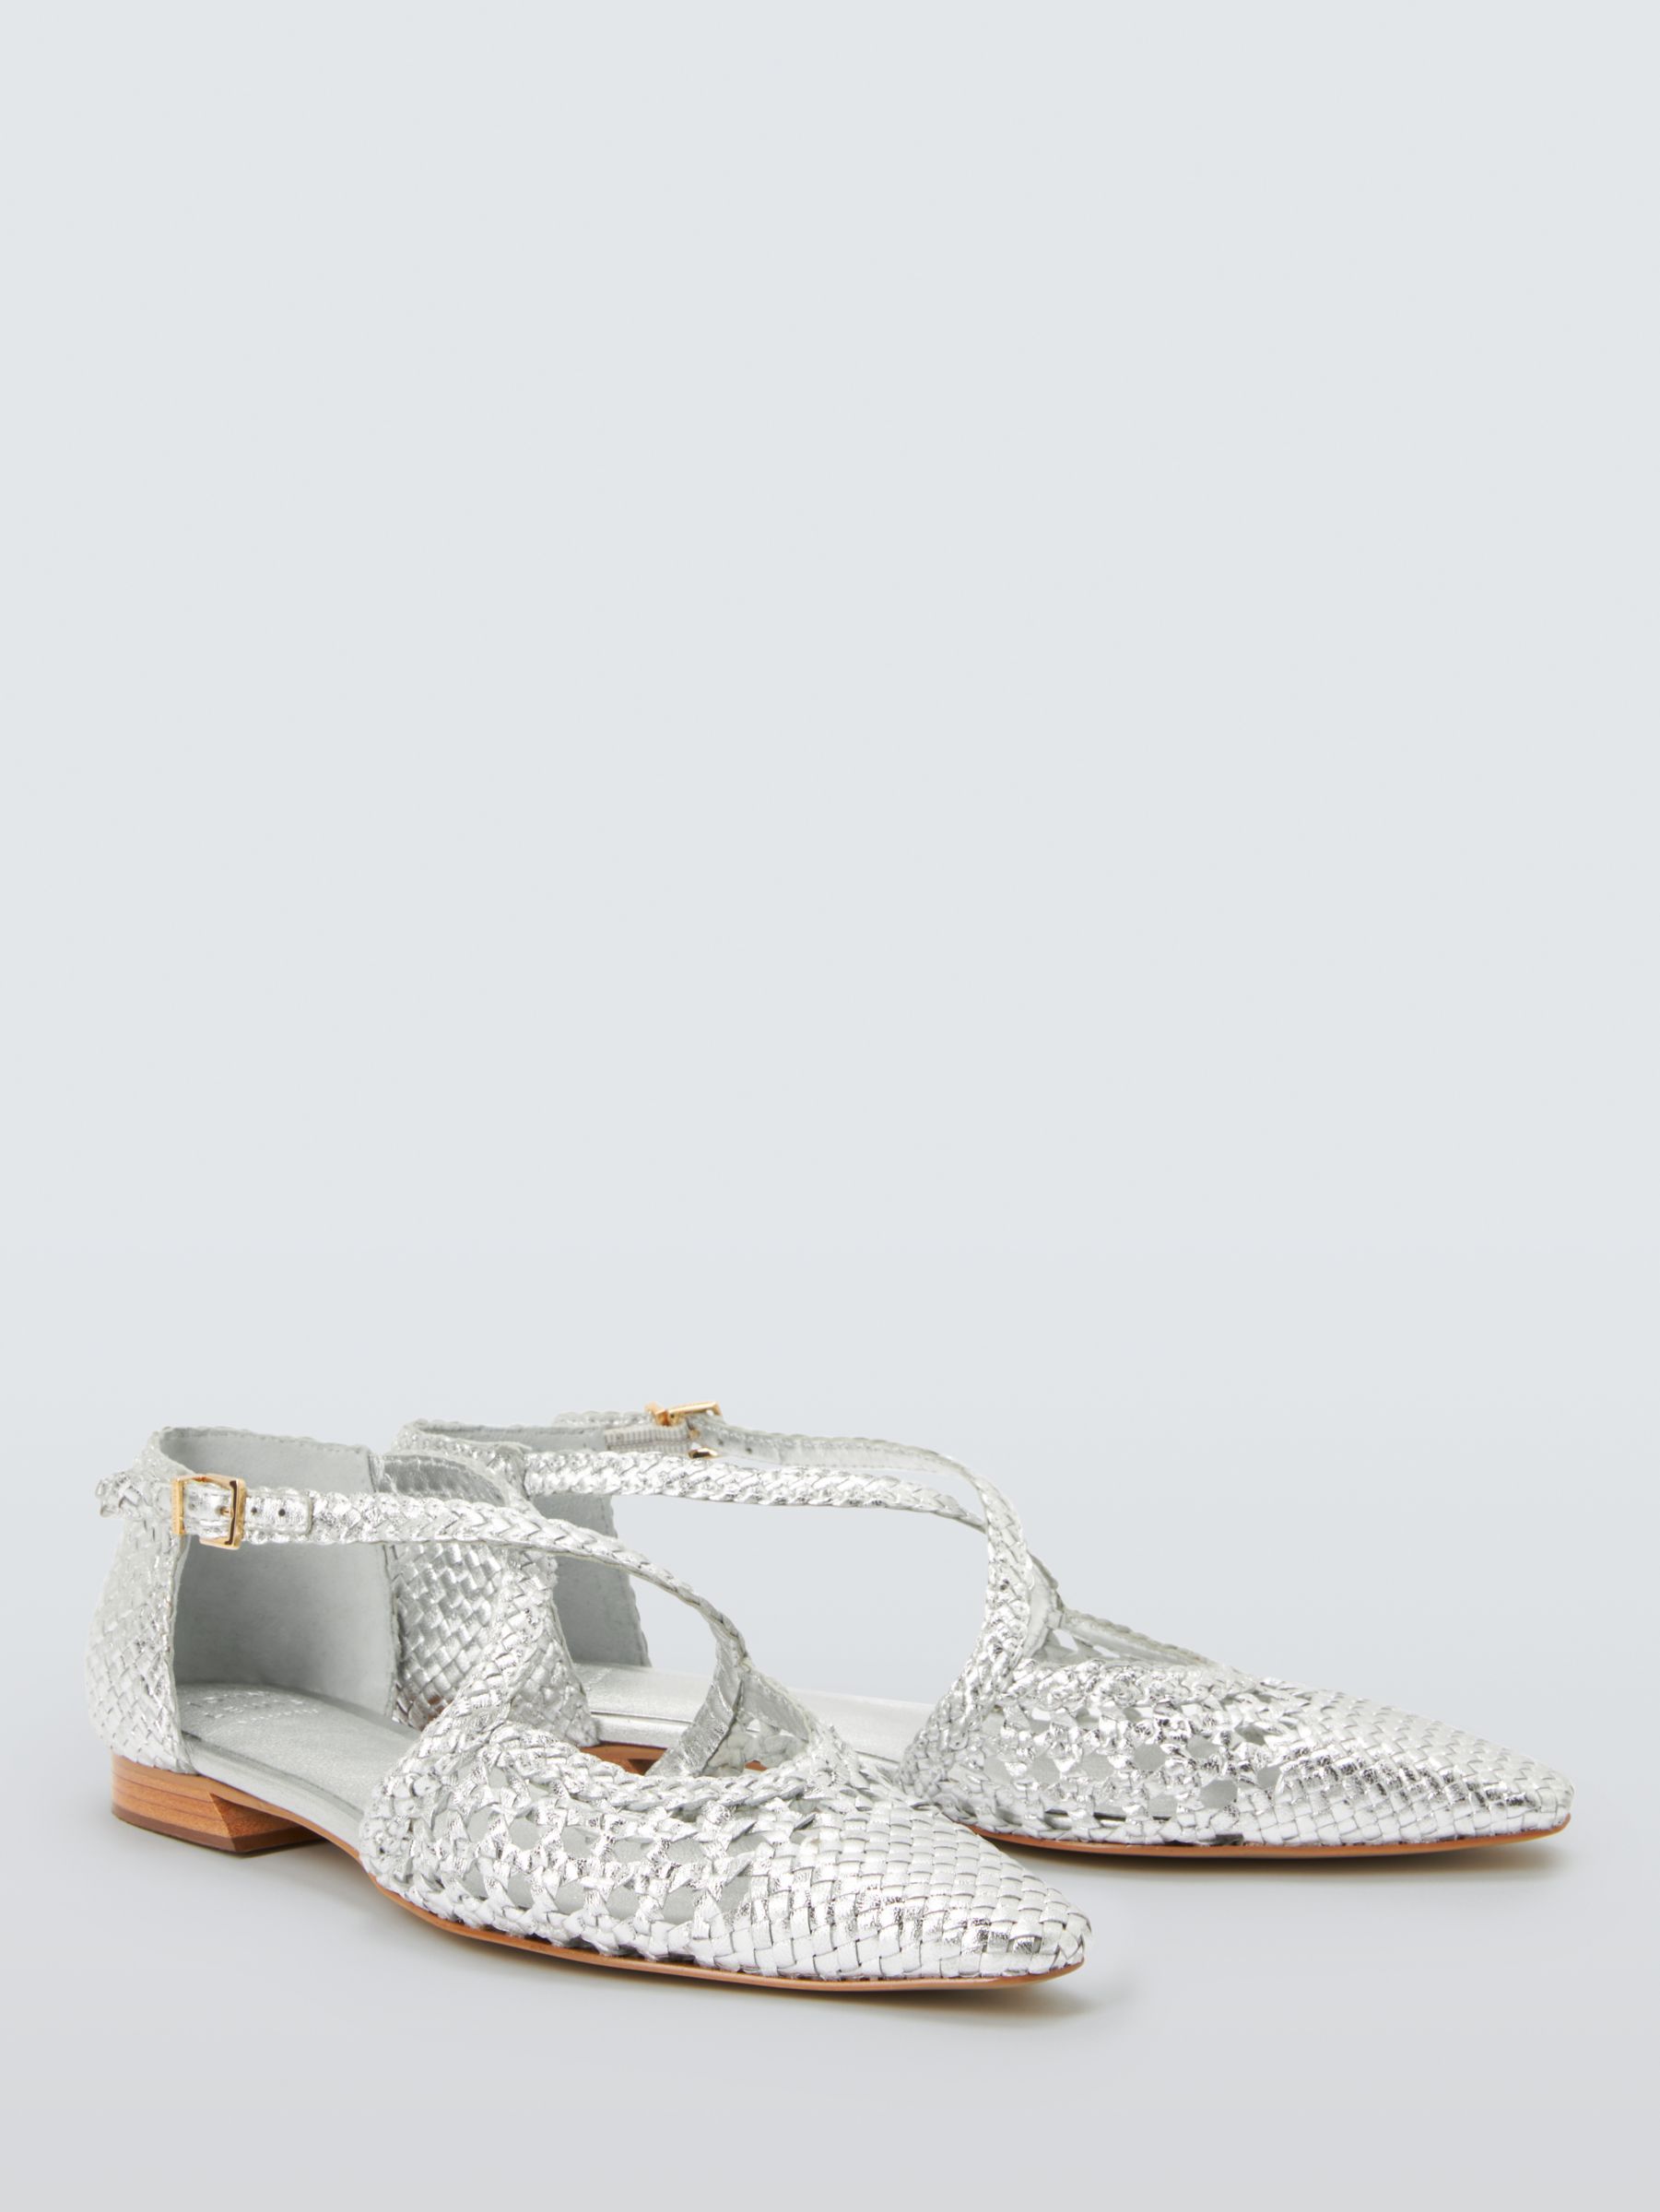 John Lewis Happie Leather Woven Cross Strap Pointed Flats, Silver, 8